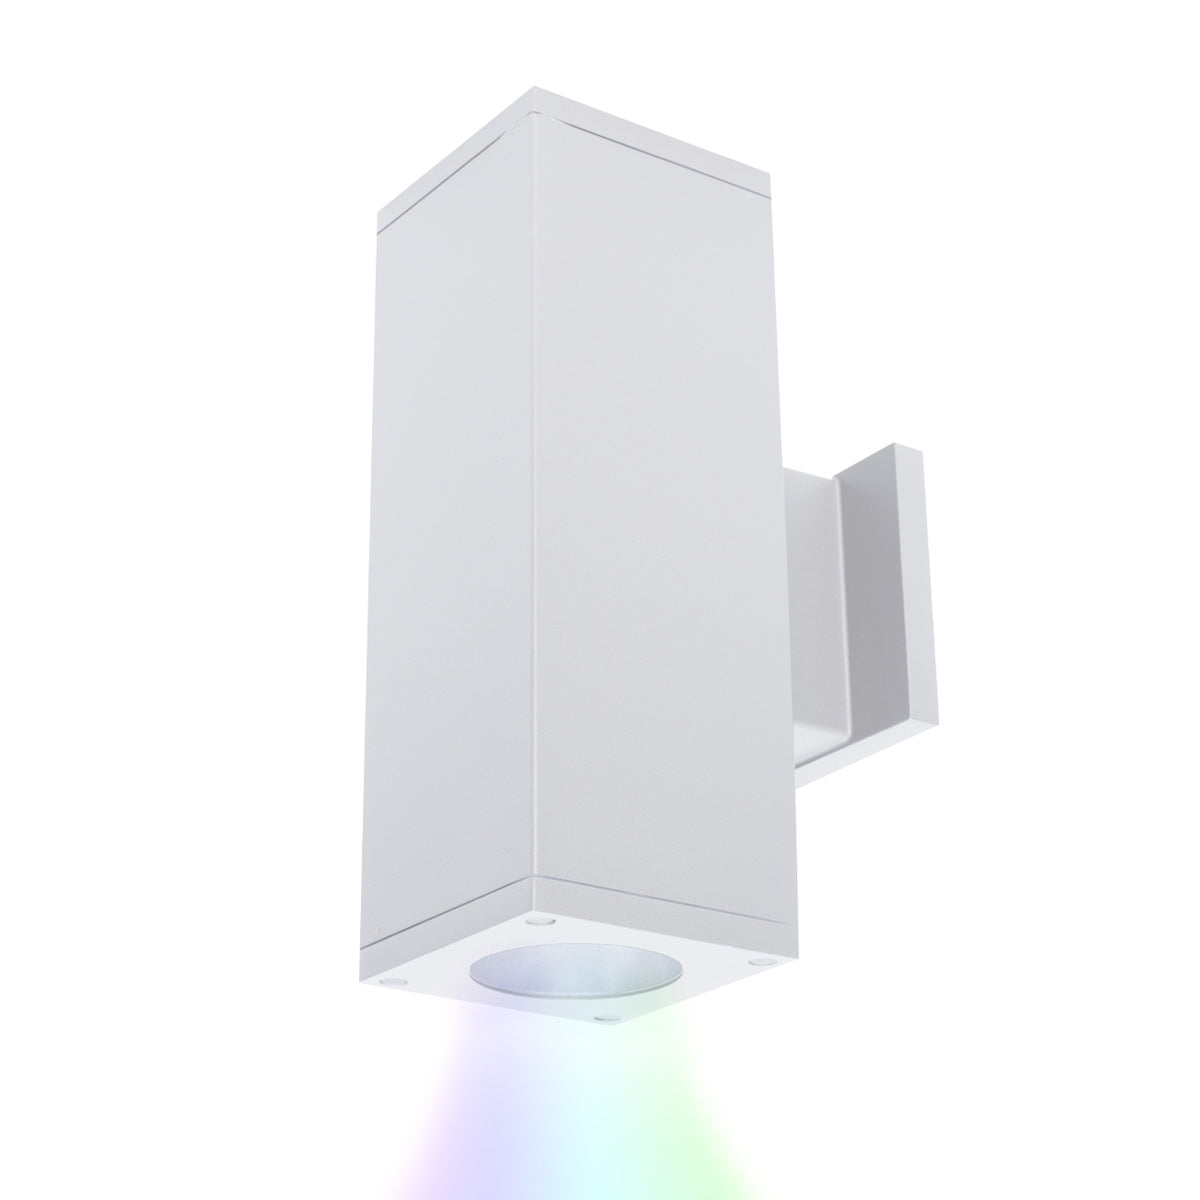 W.A.C. Canada - LED Wall Light - Cube Arch - White- Union Lighting Luminaires Decor